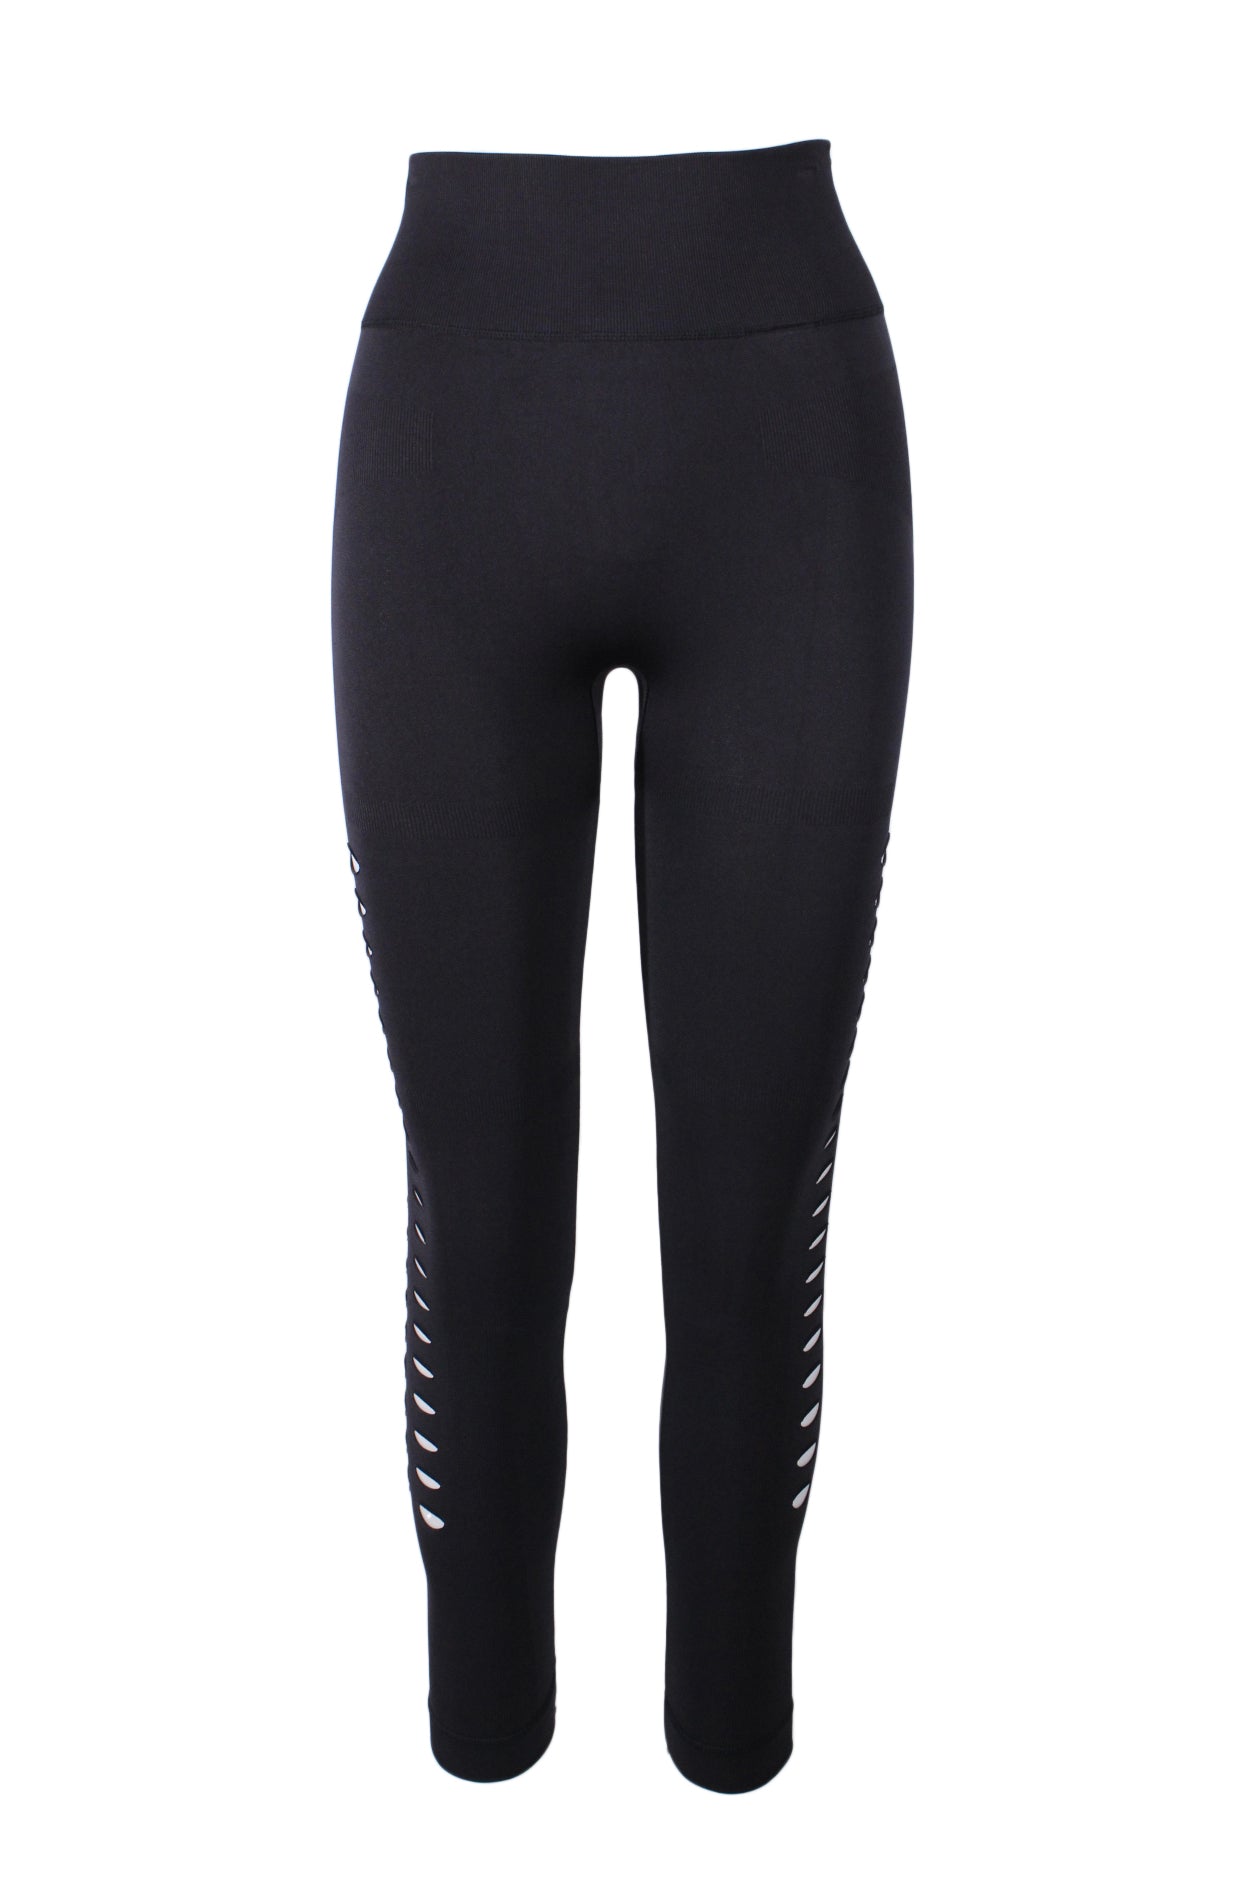 front angle adidas x stella mccartney black stylized athletic leggings with tear-shaped cutout side detail.